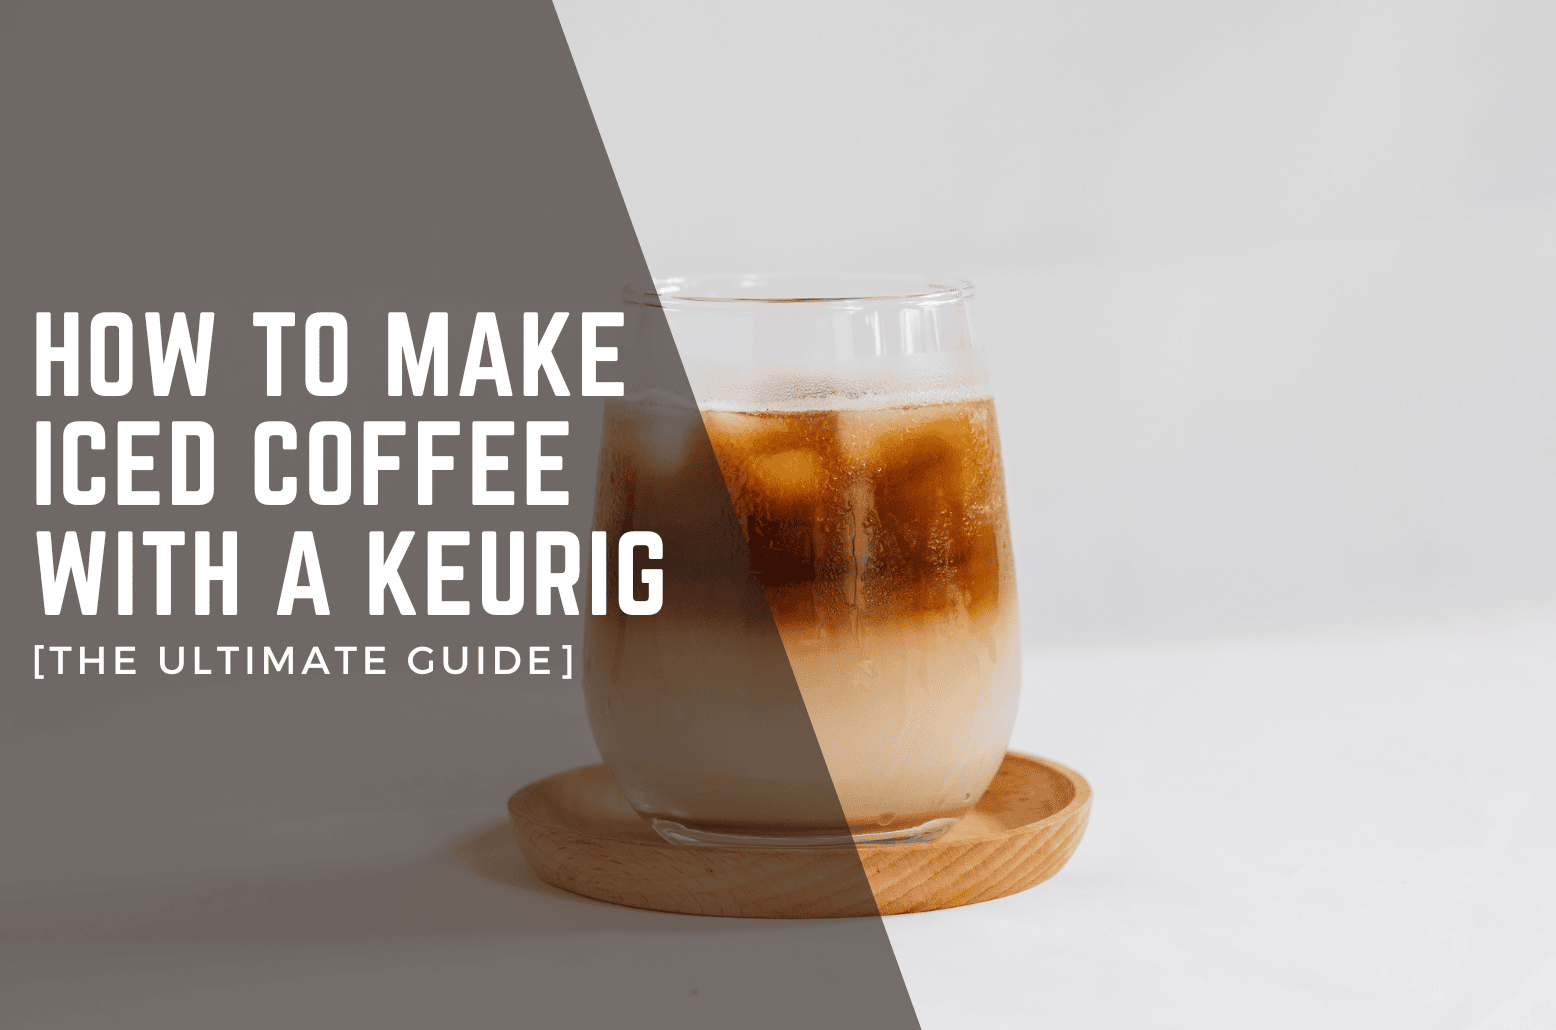 How to Make Iced Coffee With a Keurig (The Ultimate Guide)